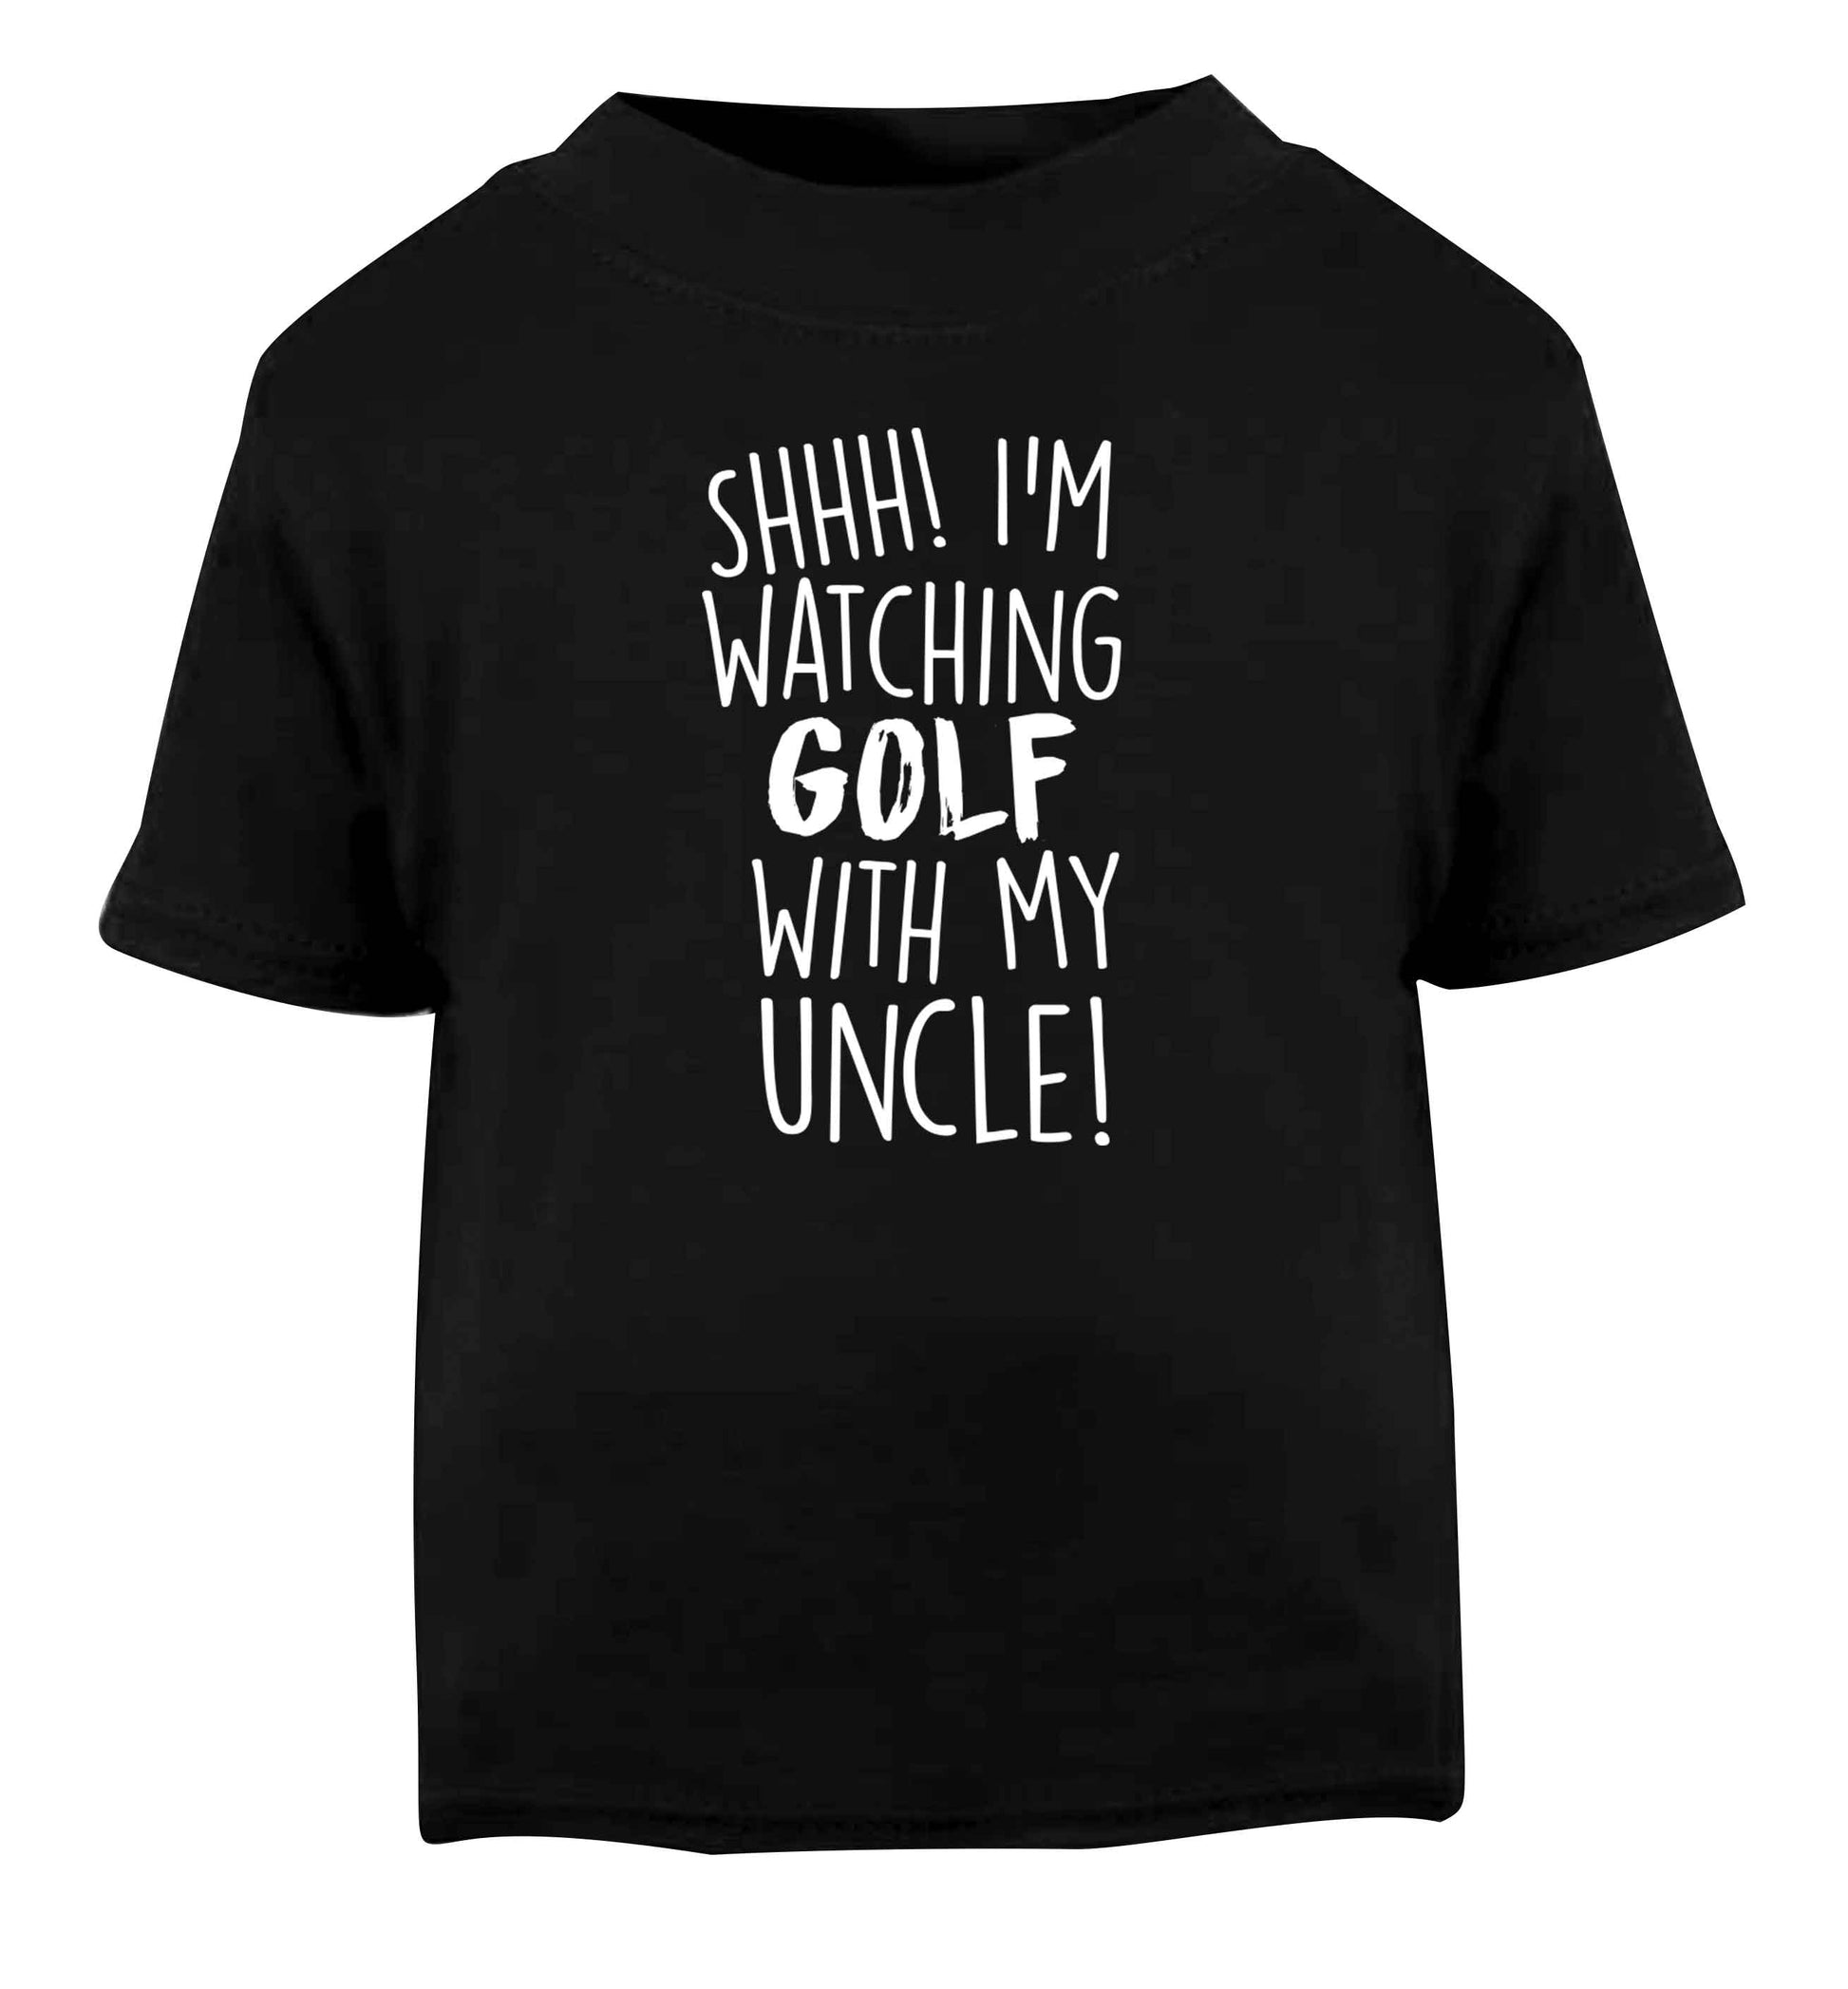 Shh I'm watching golf with my uncle Black Baby Toddler Tshirt 2 years